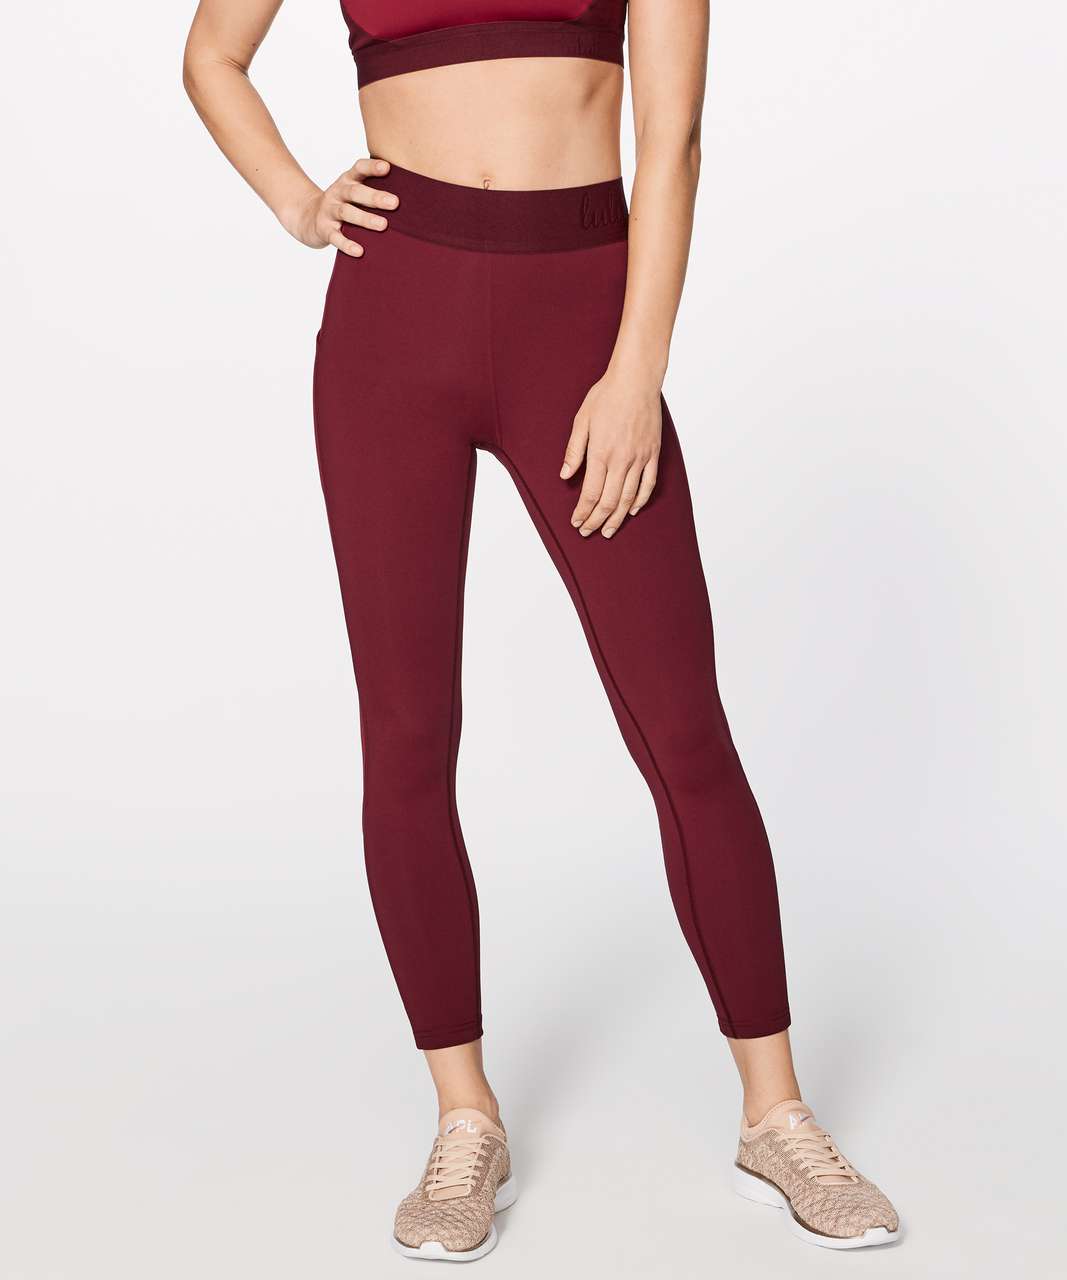 Lululemon Box it Out leggings and bra set size 4 oxblood red GUC